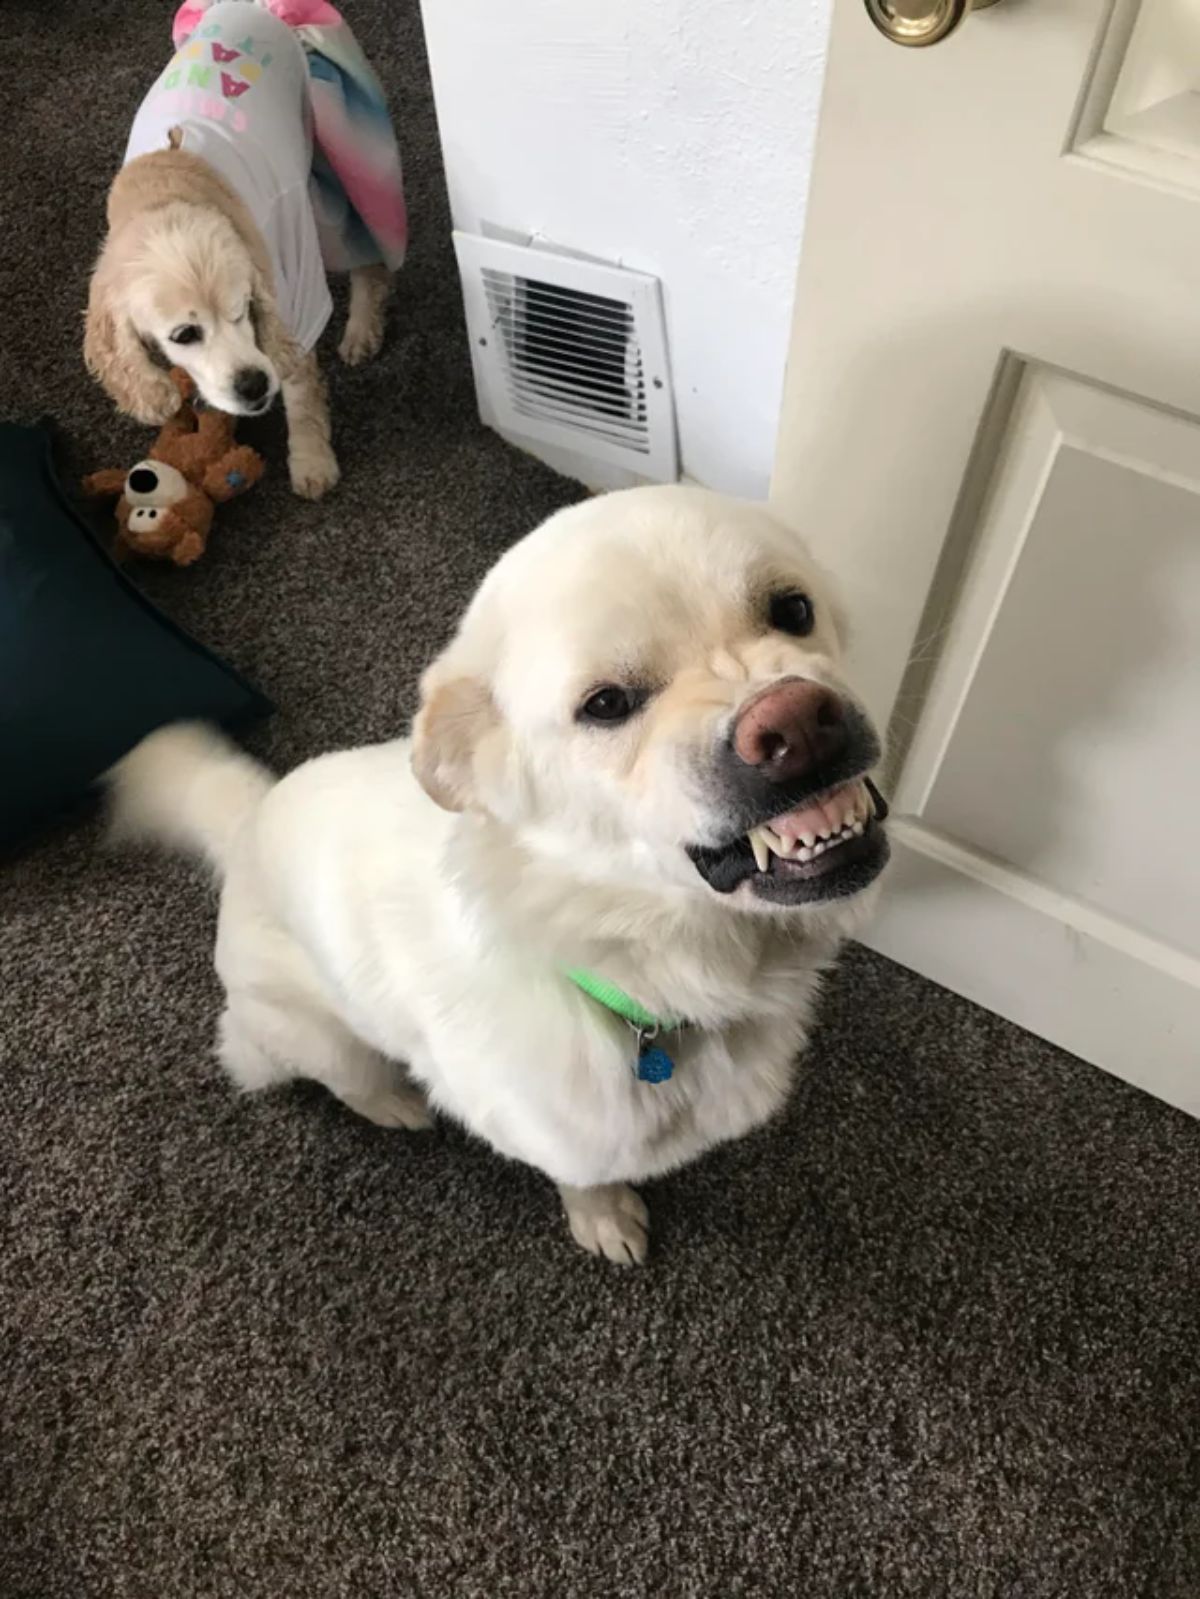 white dog smiling looking like a snarl with a brown dog in a shirt behind it